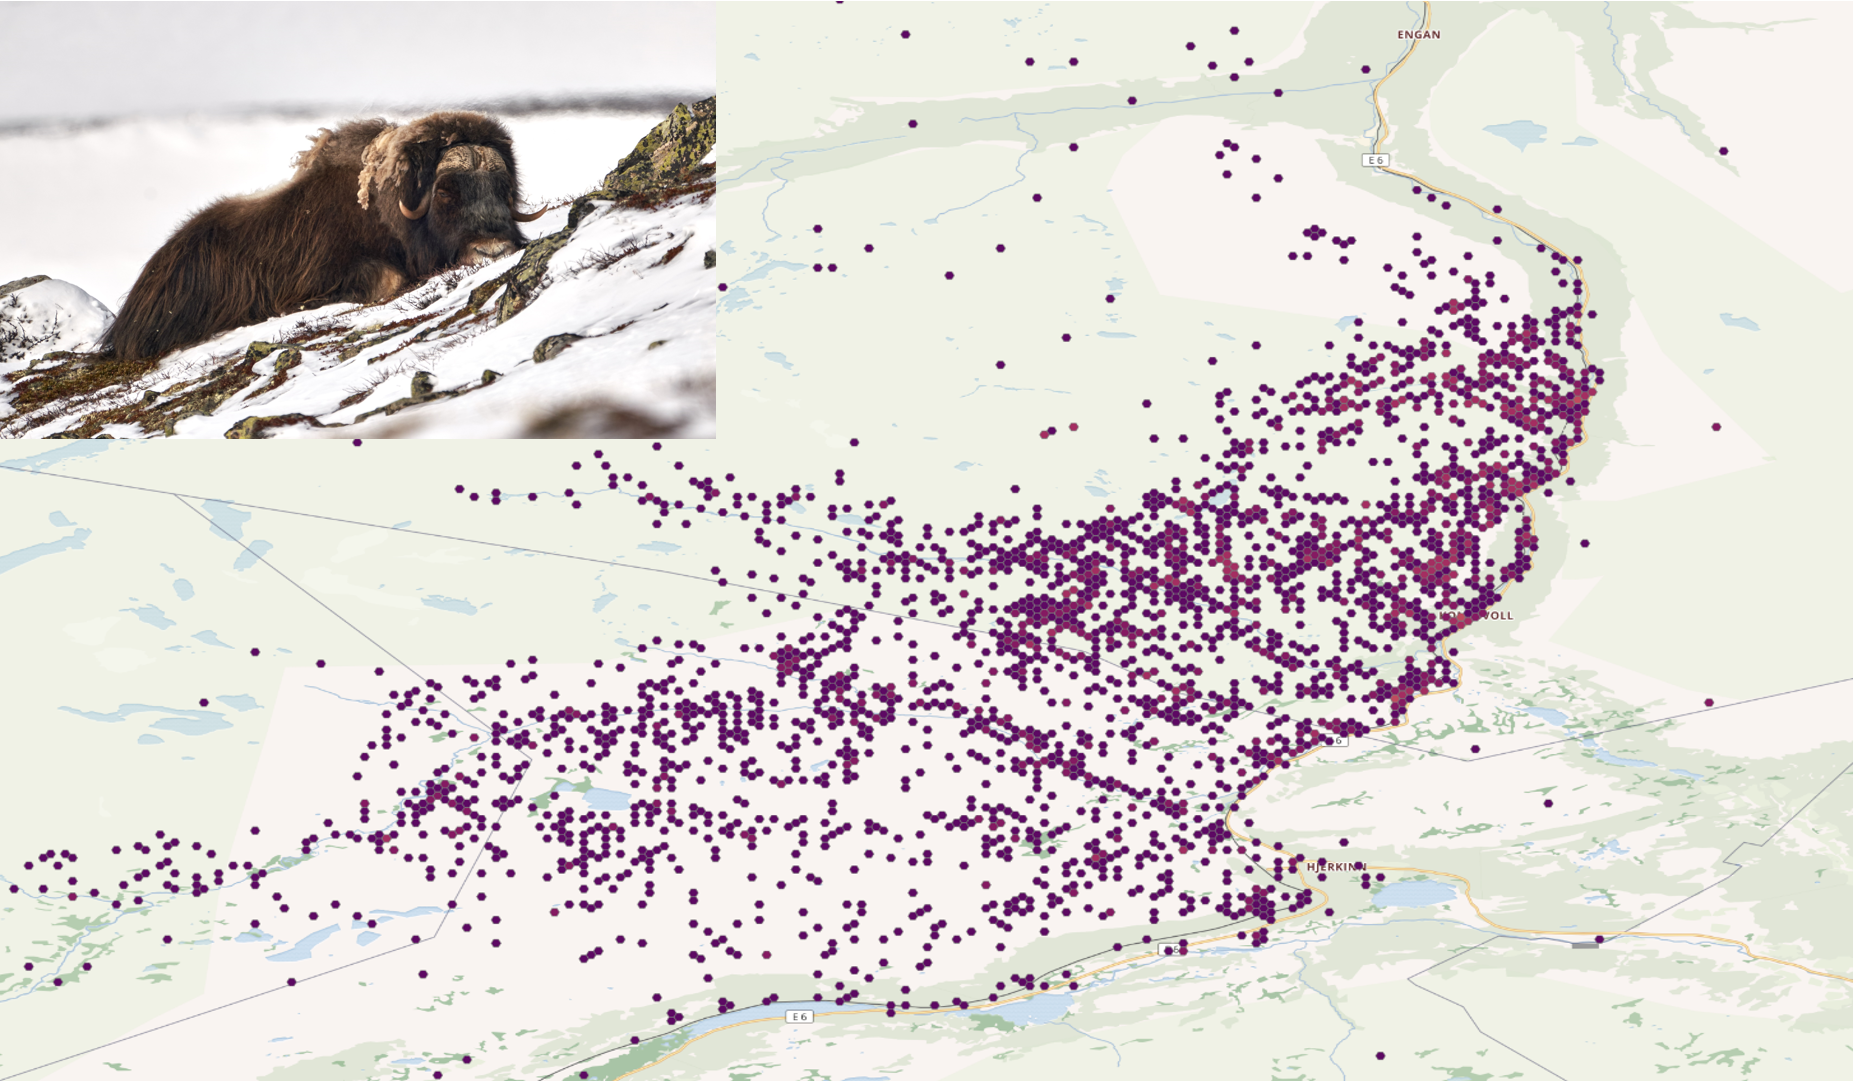 Map of purple dots representing musk oxen